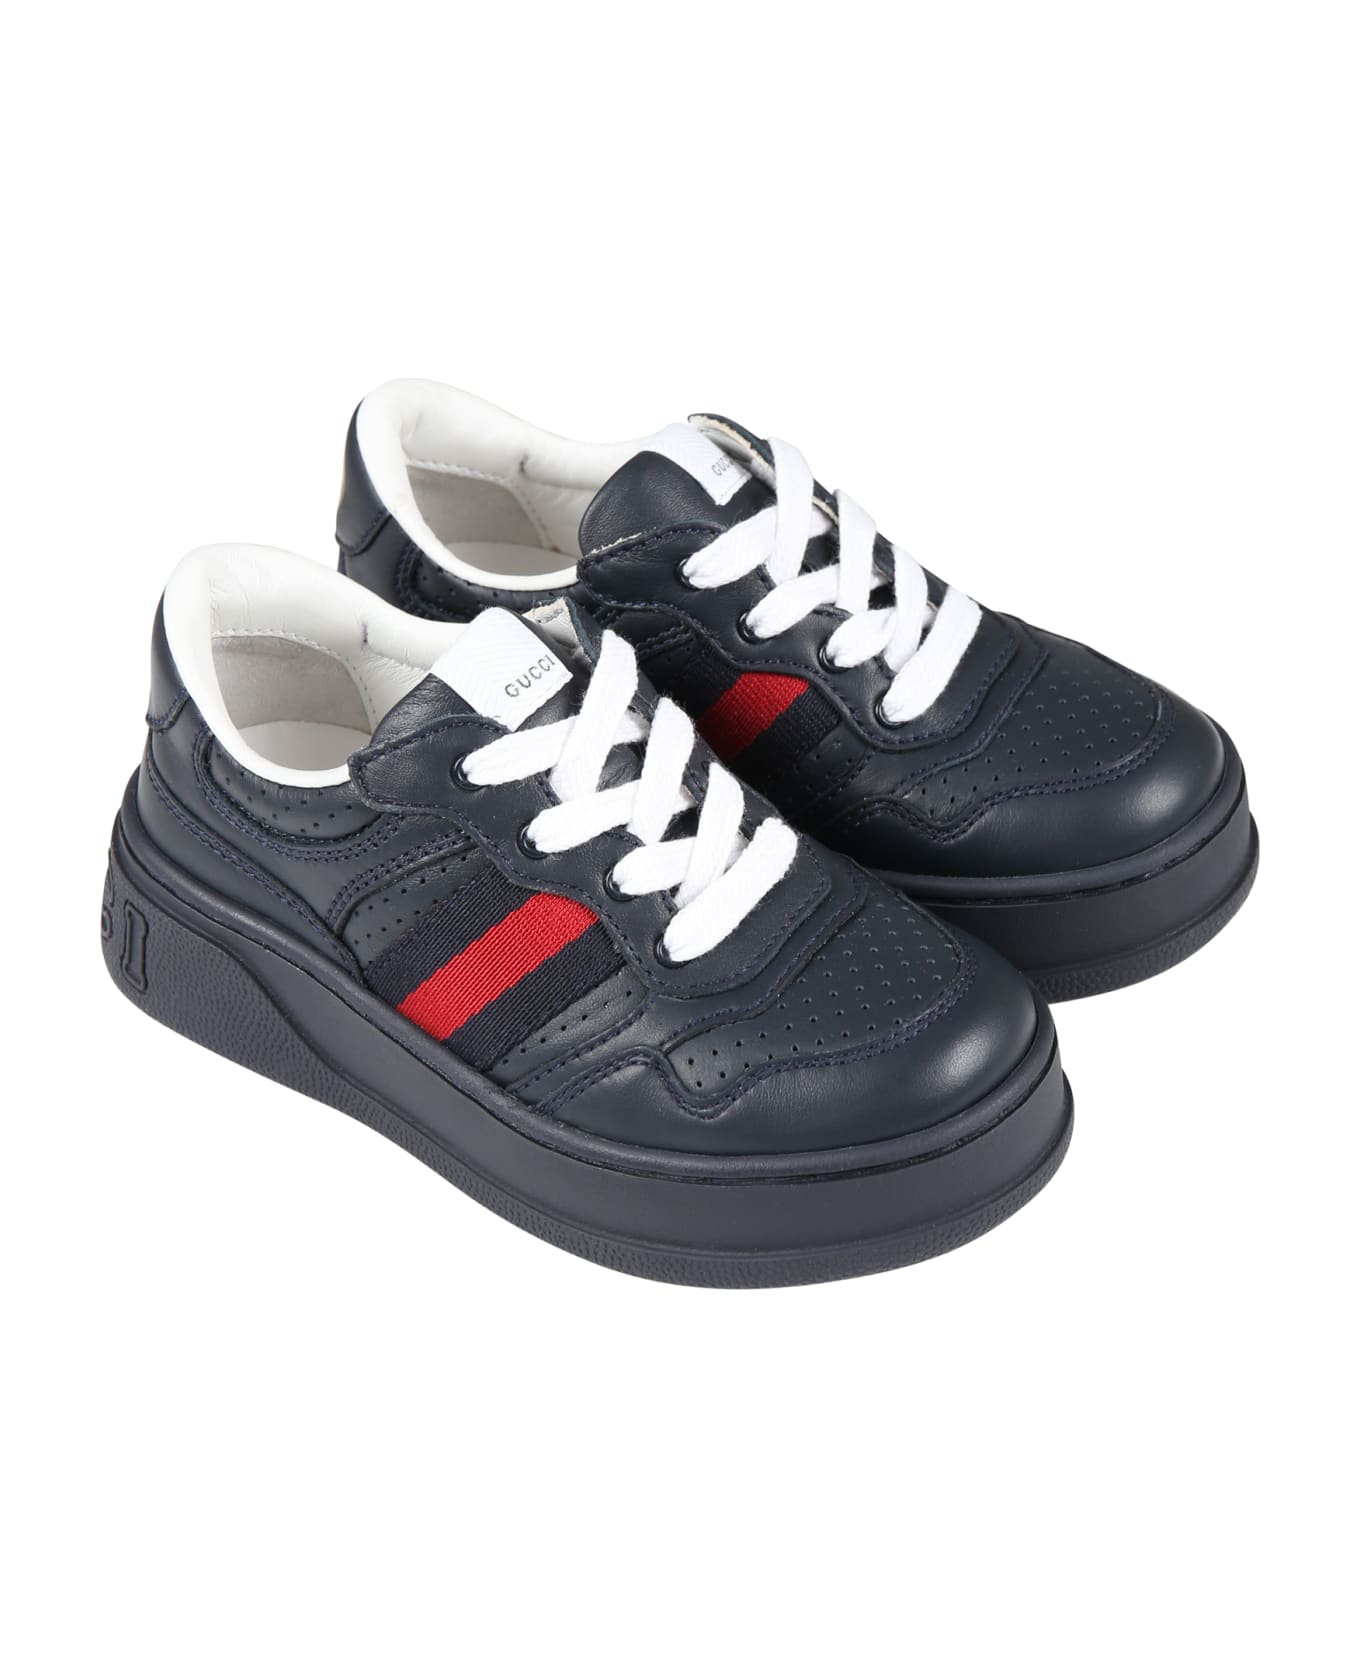 Gucci Blue Sneakers For Boy With Web - Blue シューズ